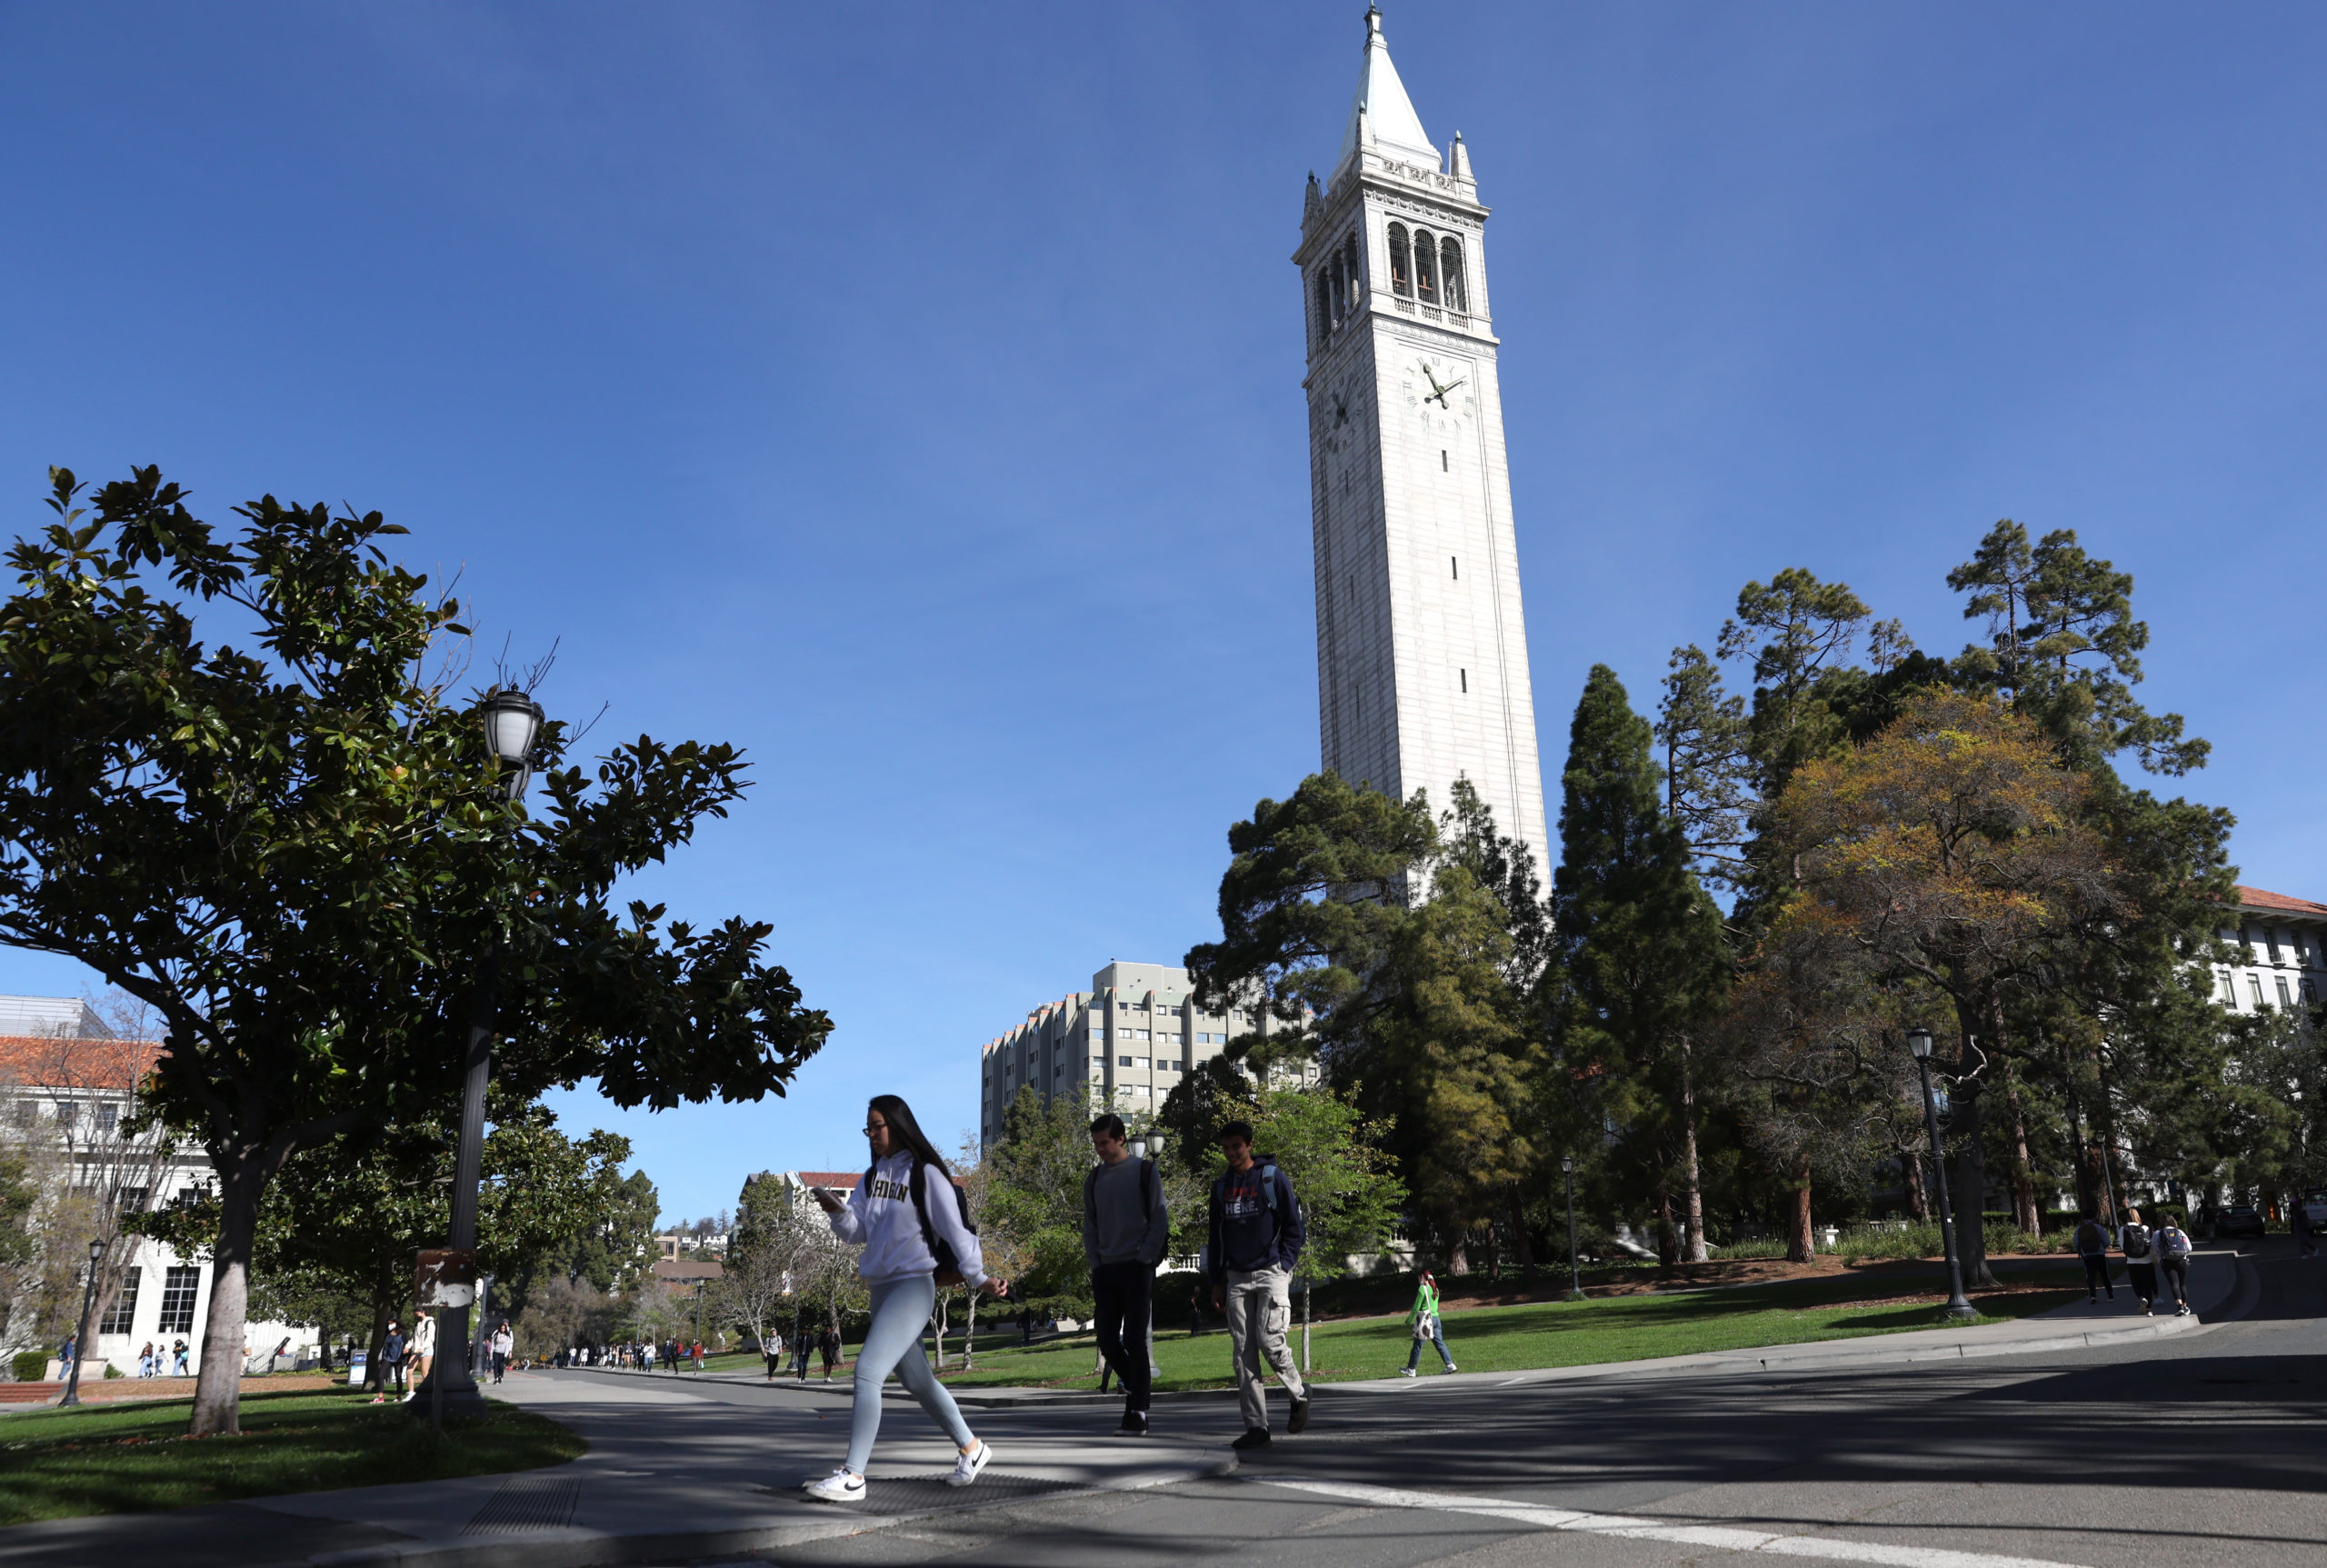 BERKELEY, CALIFORNIA - MARCH 14: People walk by Sather Tower on the UC Berkeley campus on March 14, 2022 in Berkeley, California. UC Berkeley is set to cut on-campus enrollment by a minimum of 2,500 students for fall enrollment due to an extreme shortage of affordable housing. Many college towns in California are facing similar shortages due to construction restraints. (Photo by Justin Sullivan/Getty Images)